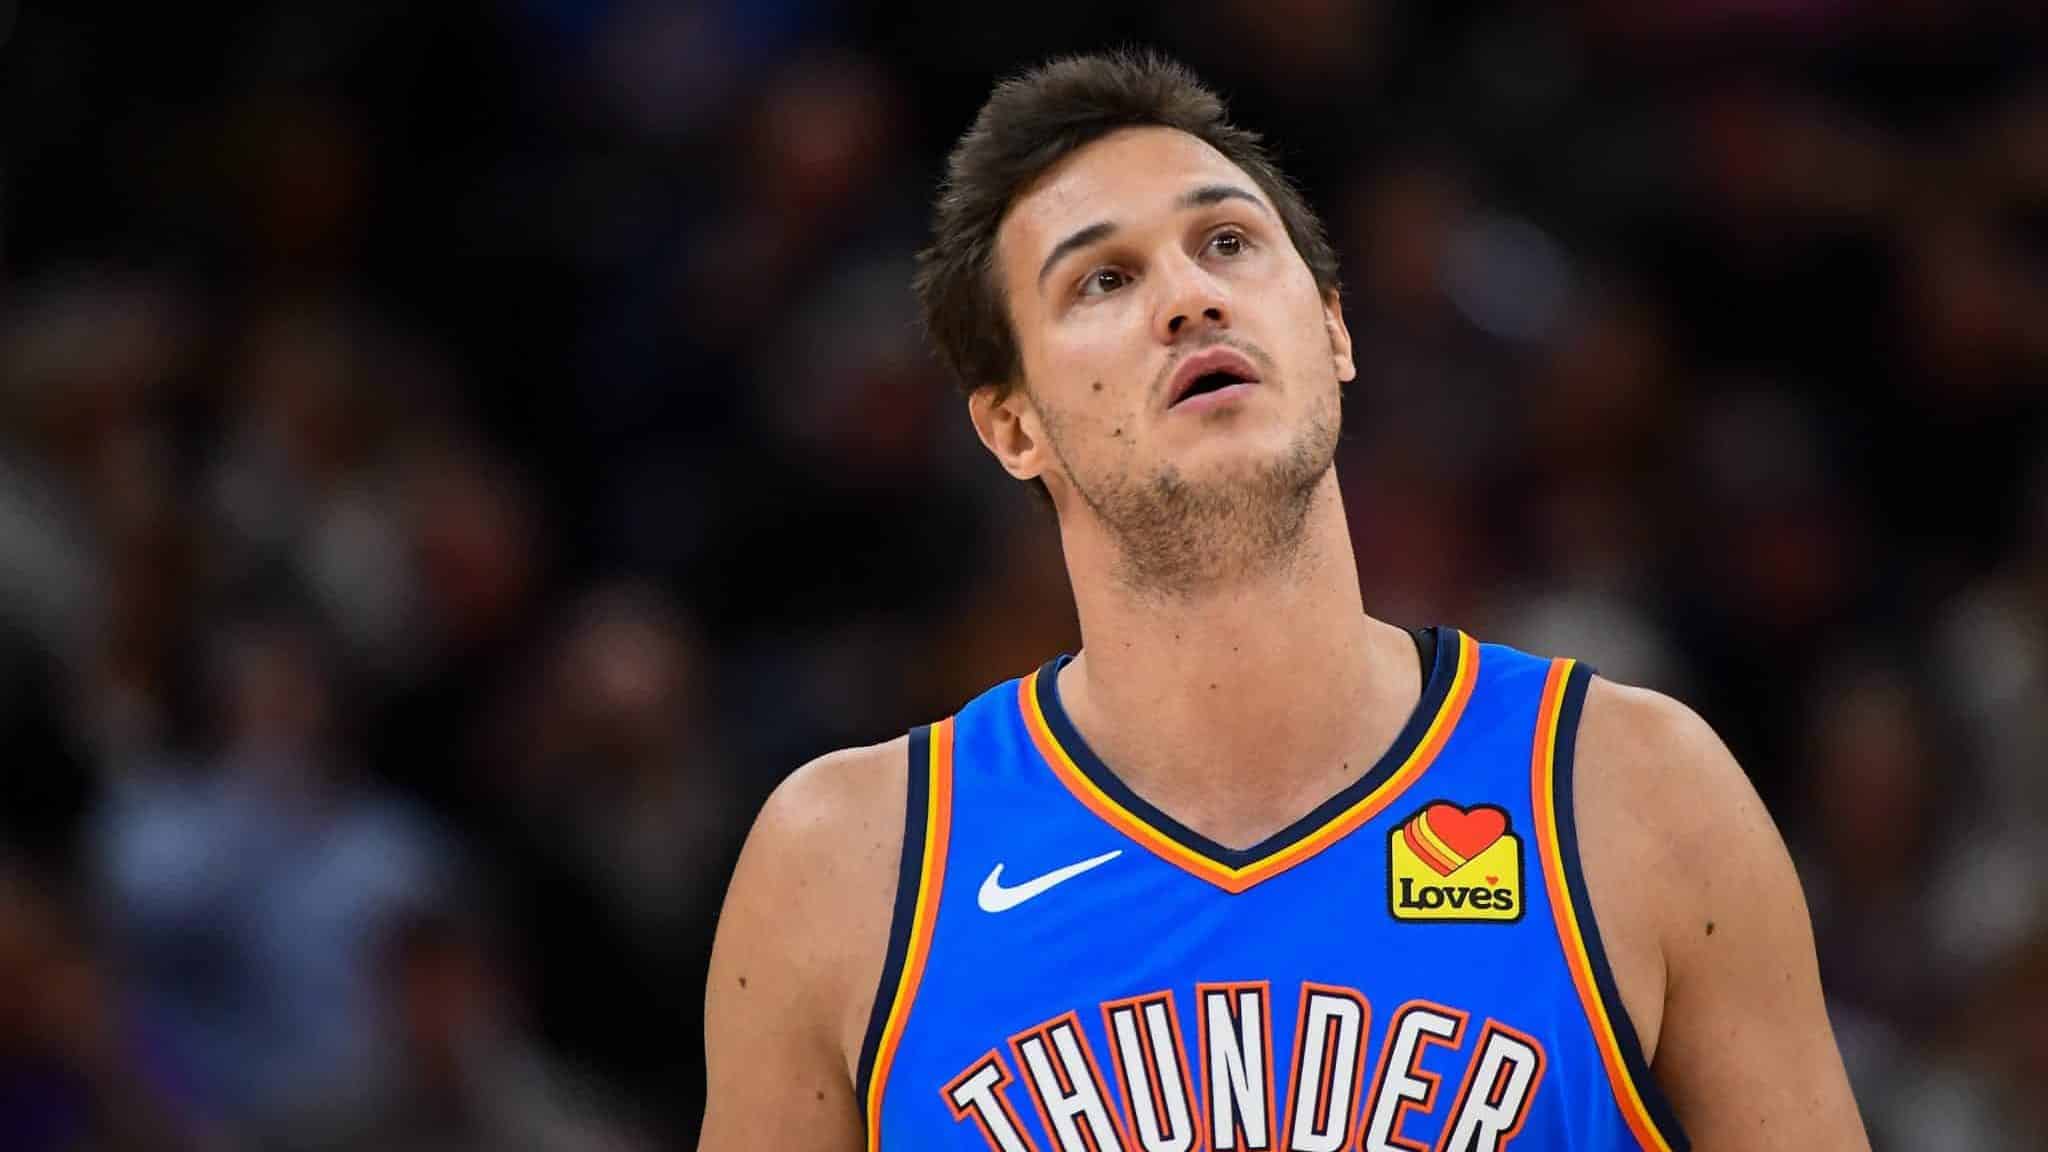 SALT LAKE CITY, UT - OCTOBER 23: Danilo Gallinari #8 of the Oklahoma City Thunder looks on during a opening night game against the Utah Jazz at Vivint Smart Home Arena on October 23, 2019 in Salt Lake City, Utah. NOTE TO USER: User expressly acknowledges and agrees that, by downloading and or using this photograph, User is consenting to the terms and conditions of the Getty Images License Agreement.